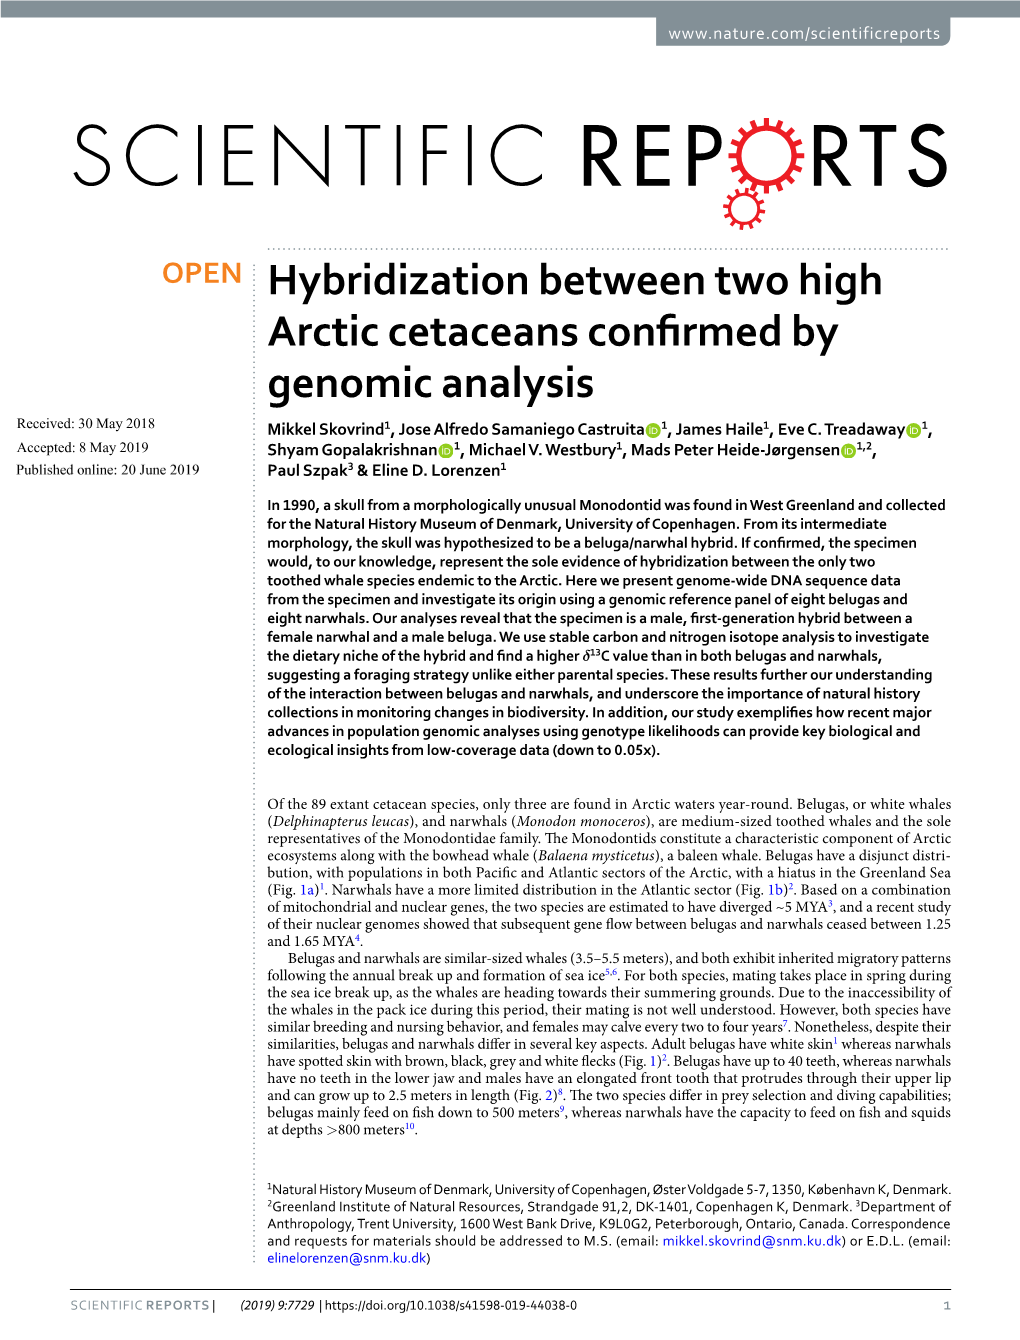 Hybridization Between Two High Arctic Cetaceans Confirmed by Genomic